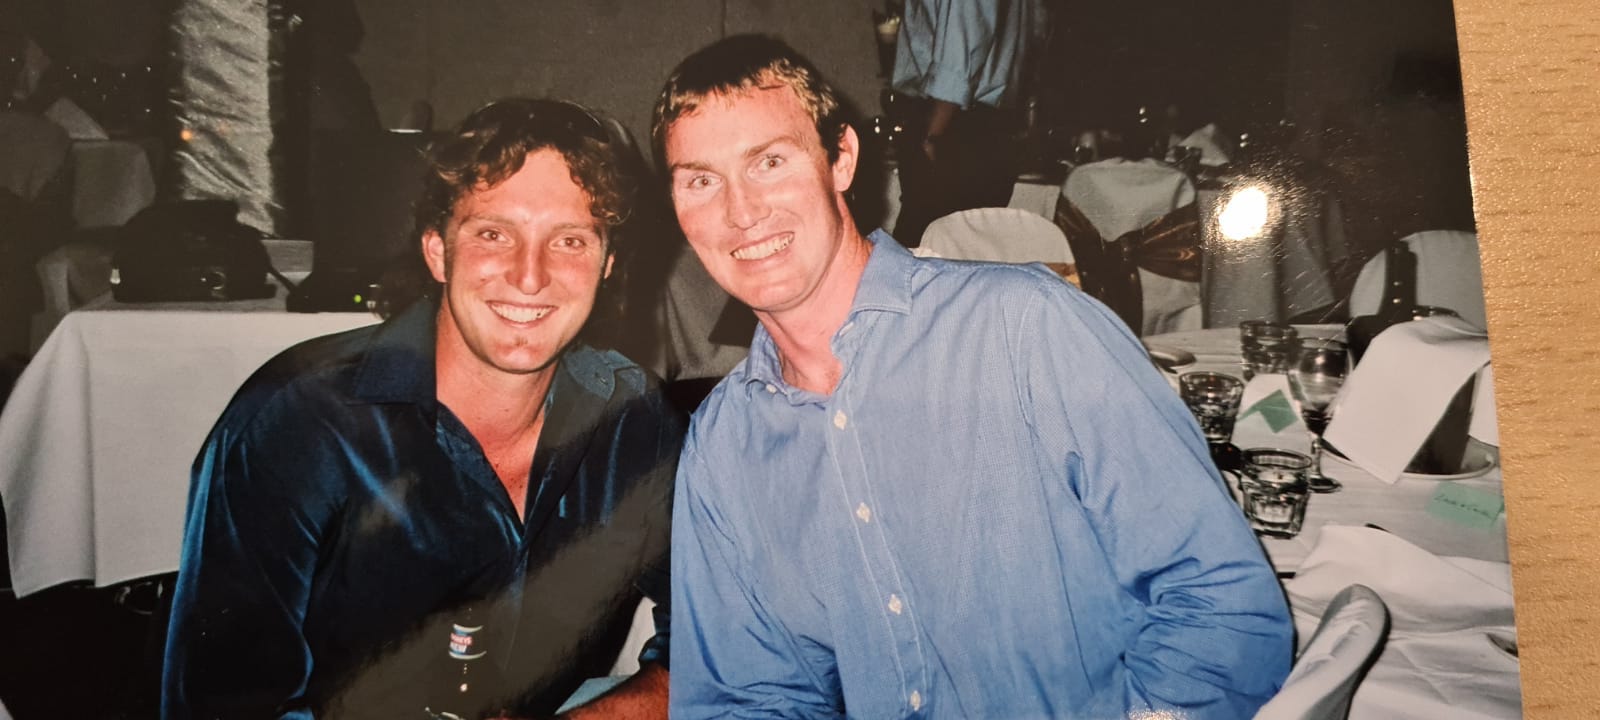 Zac Simpson in the early 2000 with an old colleague at a dinner